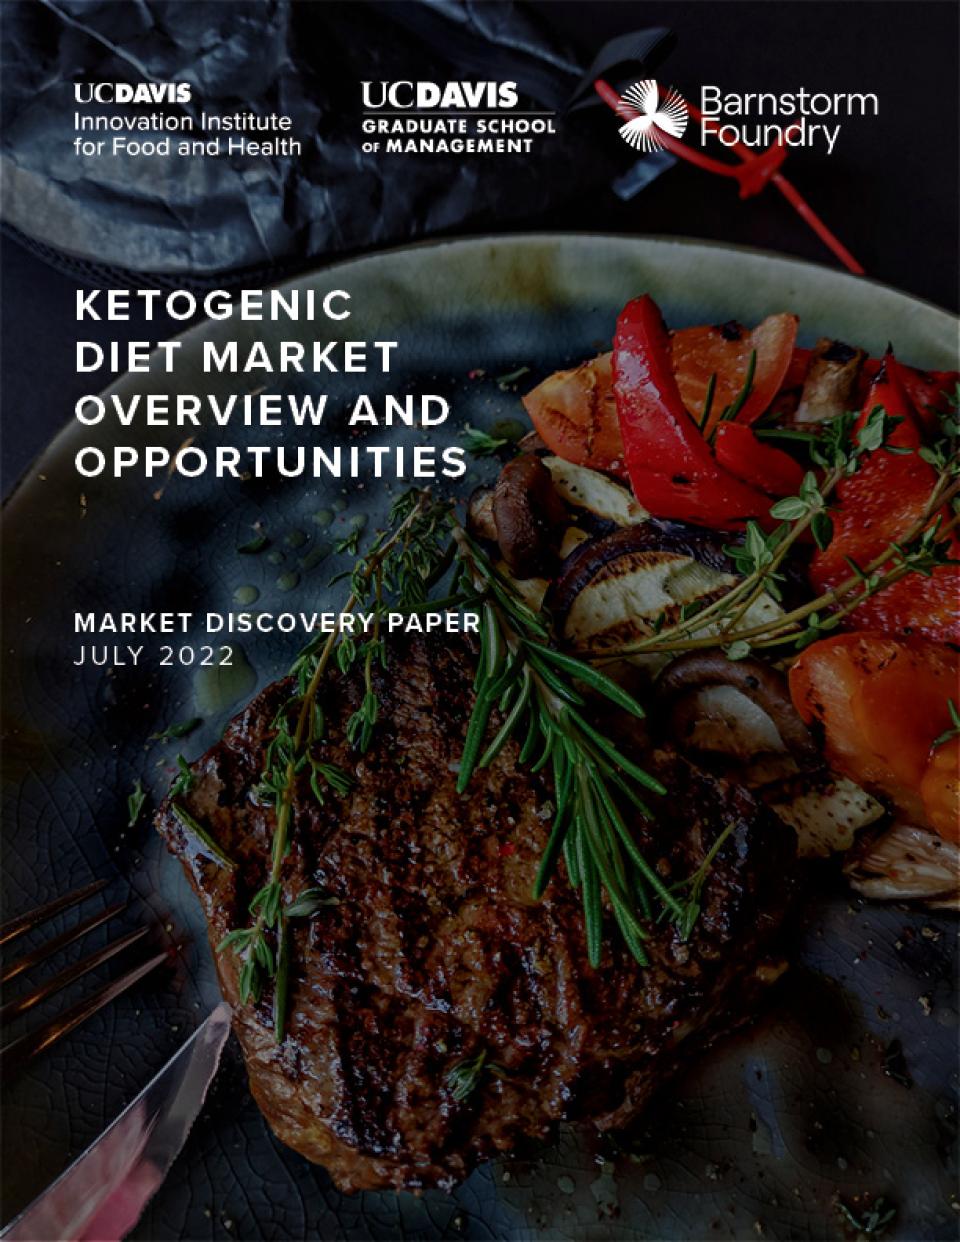 Keto diet market discovery paper cover